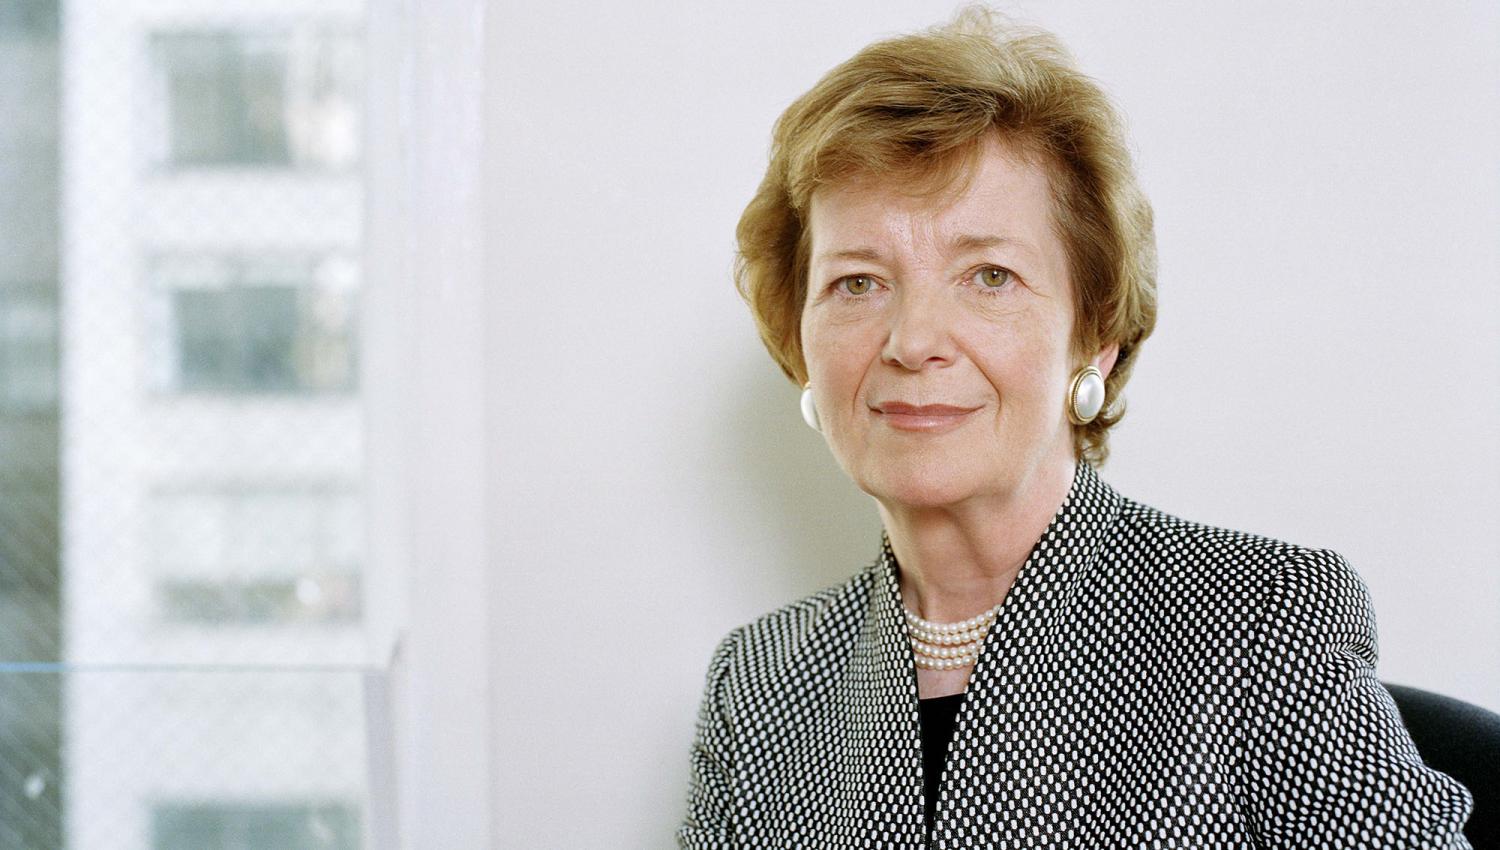 Mary Robinson, former U.N. High Commissioner of Human Rights and President of Ireland 